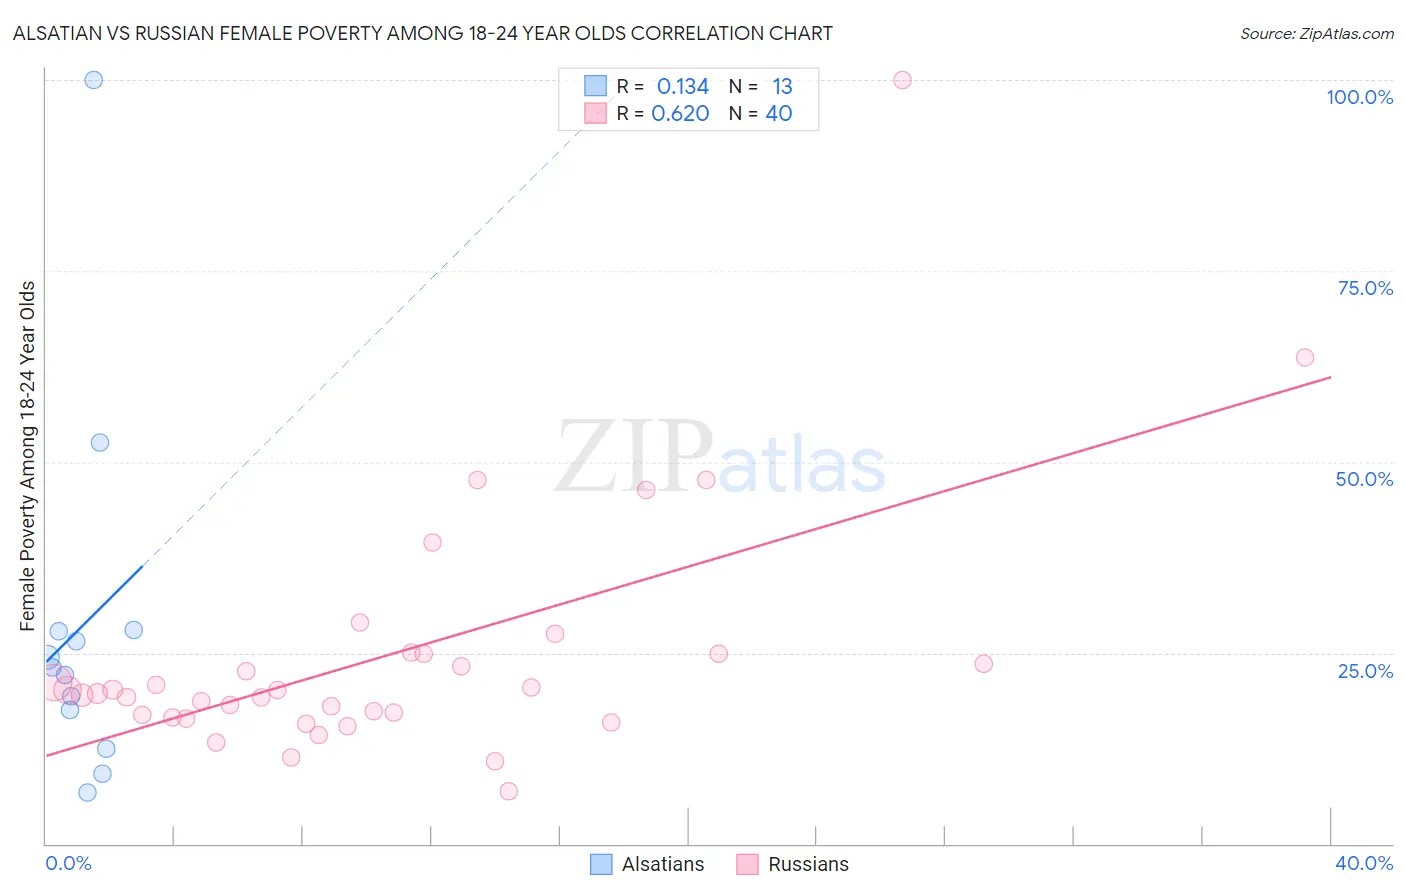 Alsatian vs Russian Female Poverty Among 18-24 Year Olds